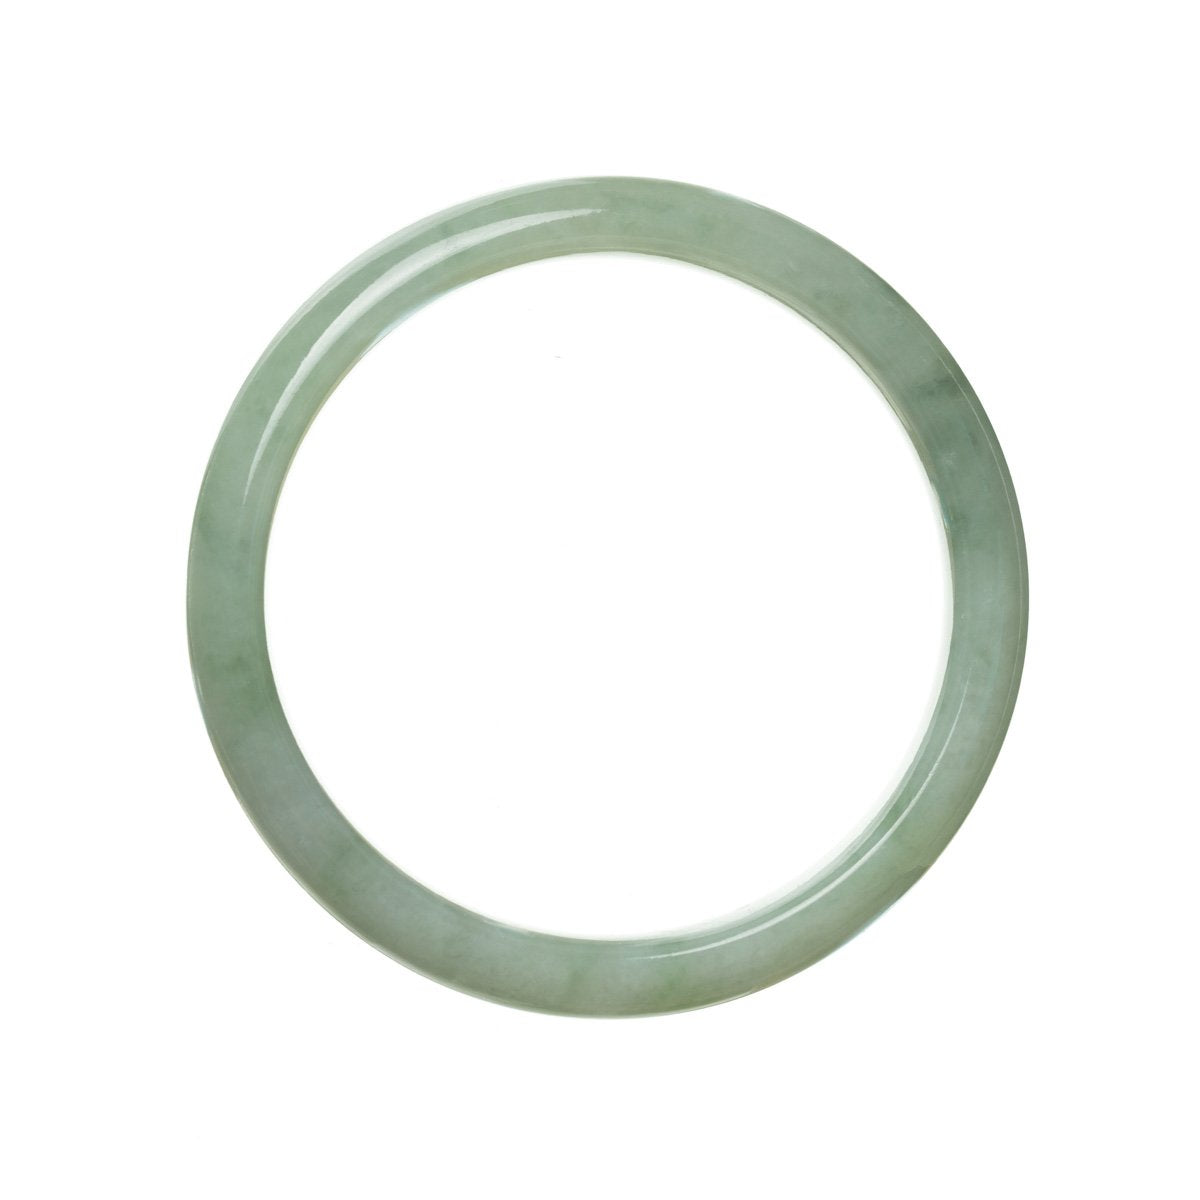 An authentic light green Burma jade bangle bracelet with a half moon design, measuring 56mm. Handcrafted by MAYS™.